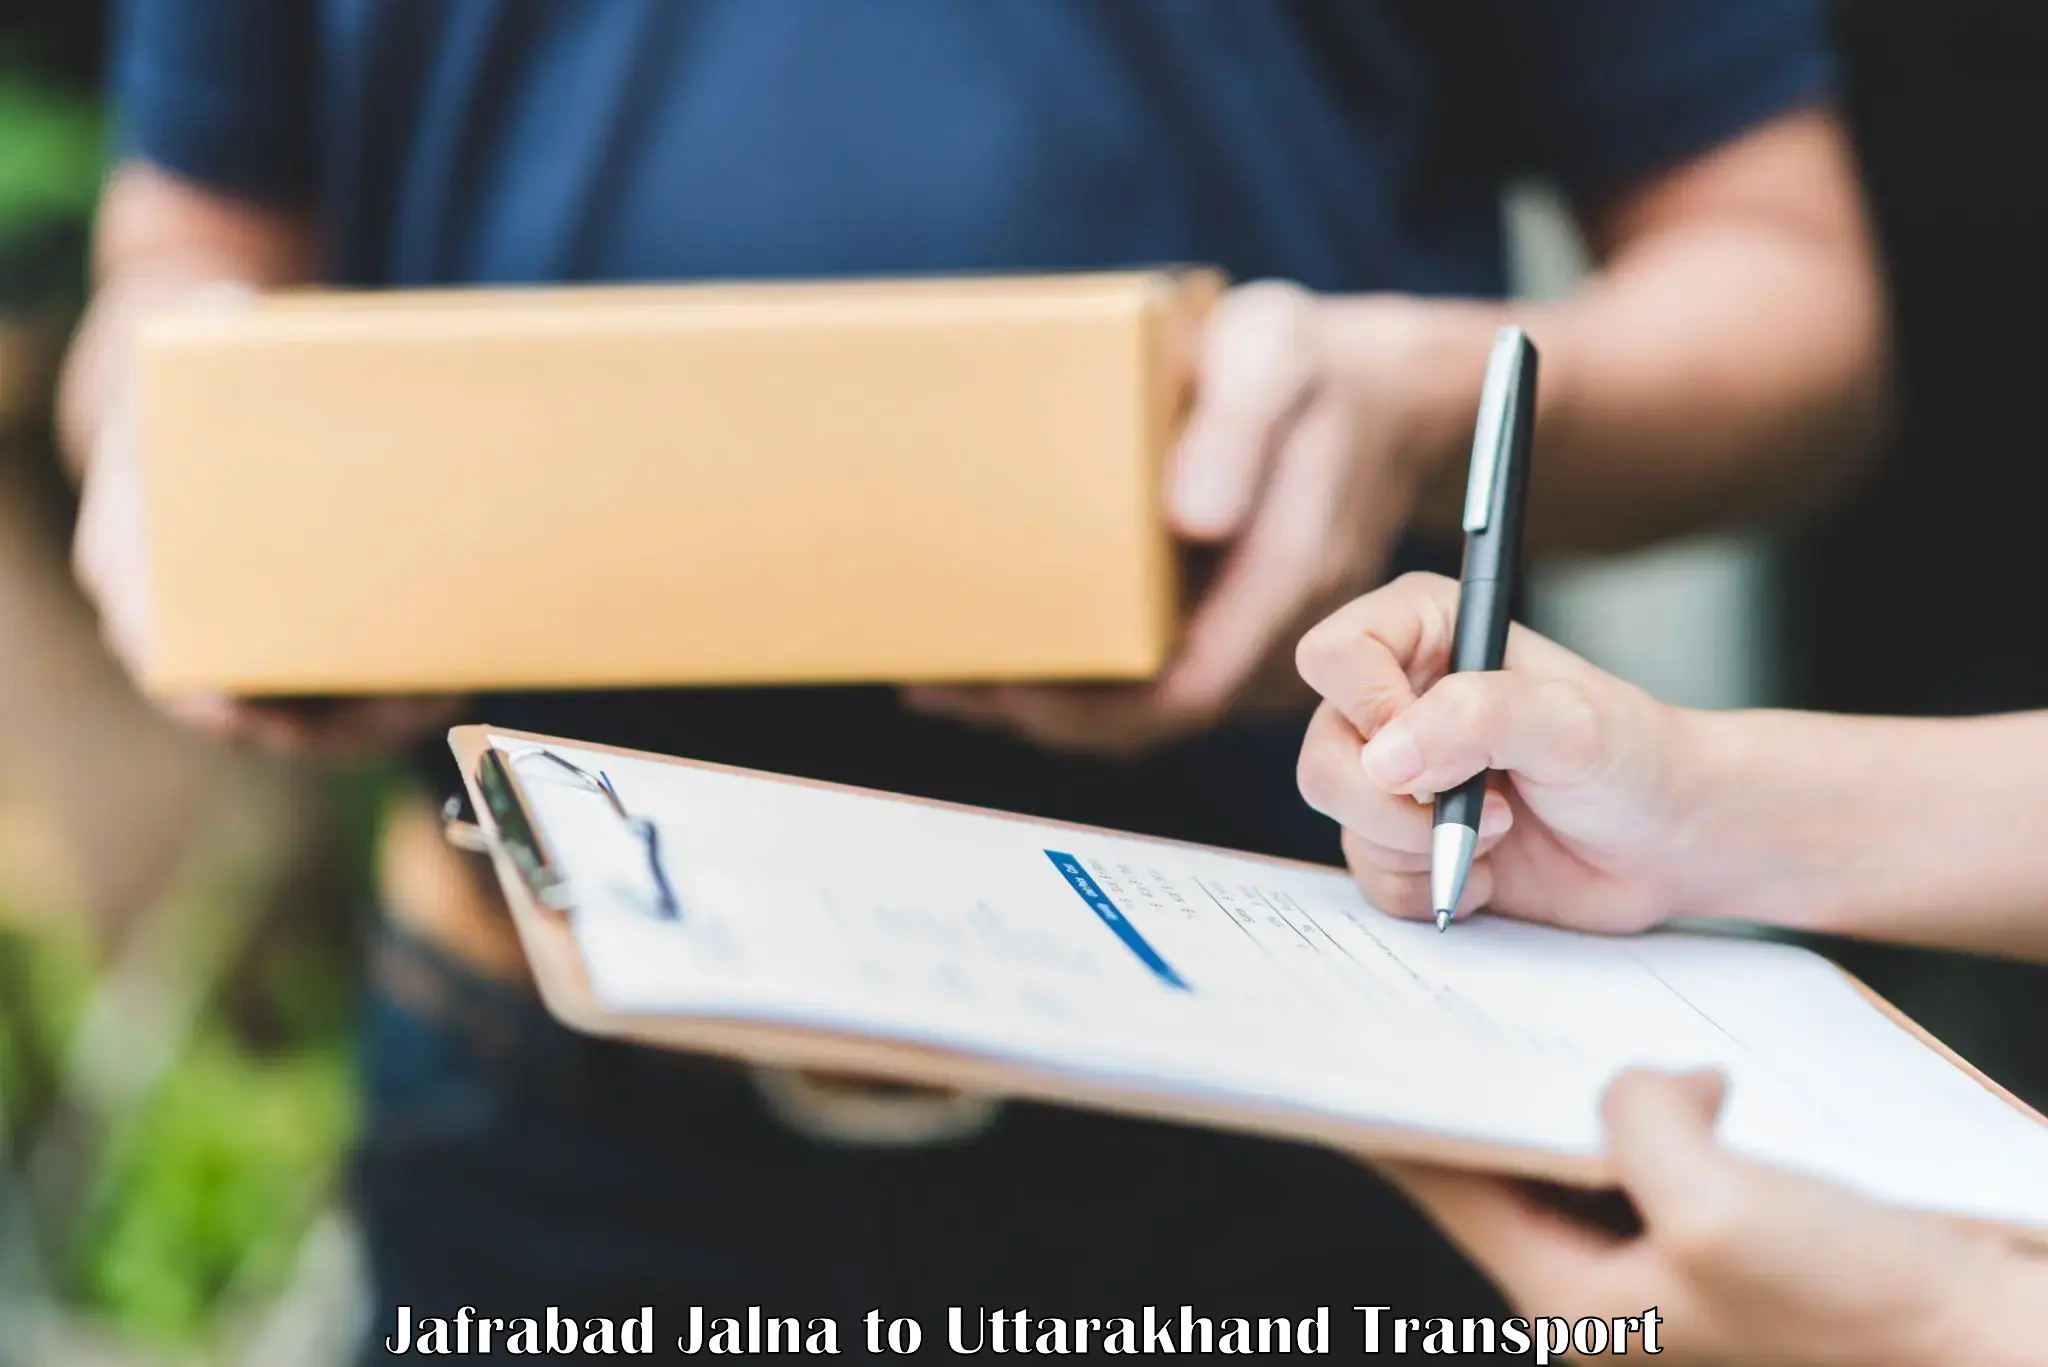 Truck transport companies in India Jafrabad Jalna to Lohaghat